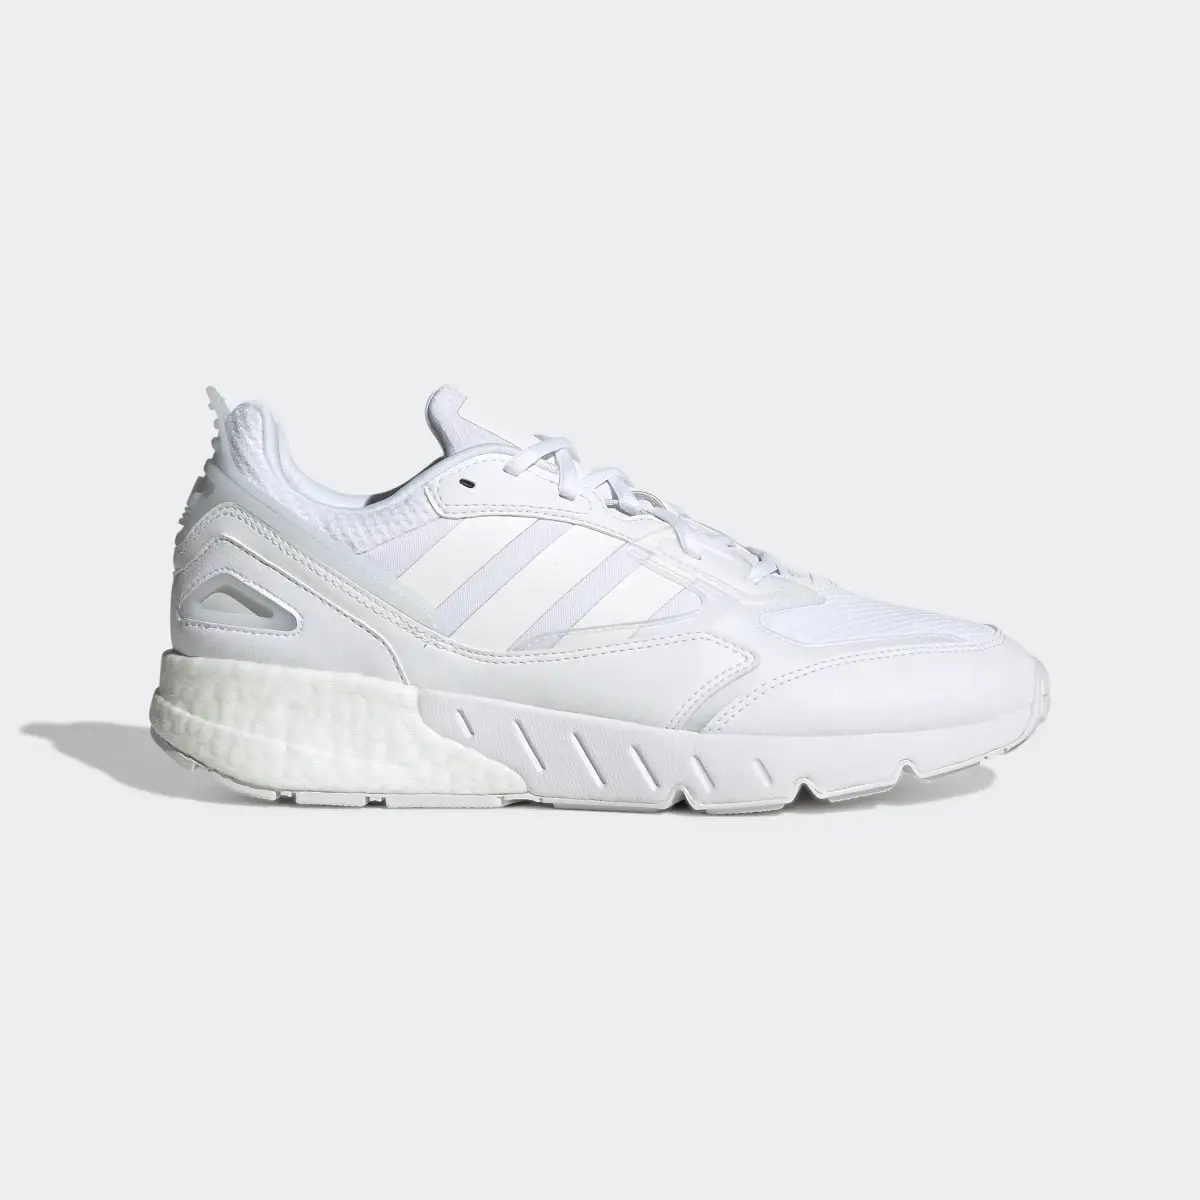 Adidas ZX 1K Boost 2.0 Shoes. 2